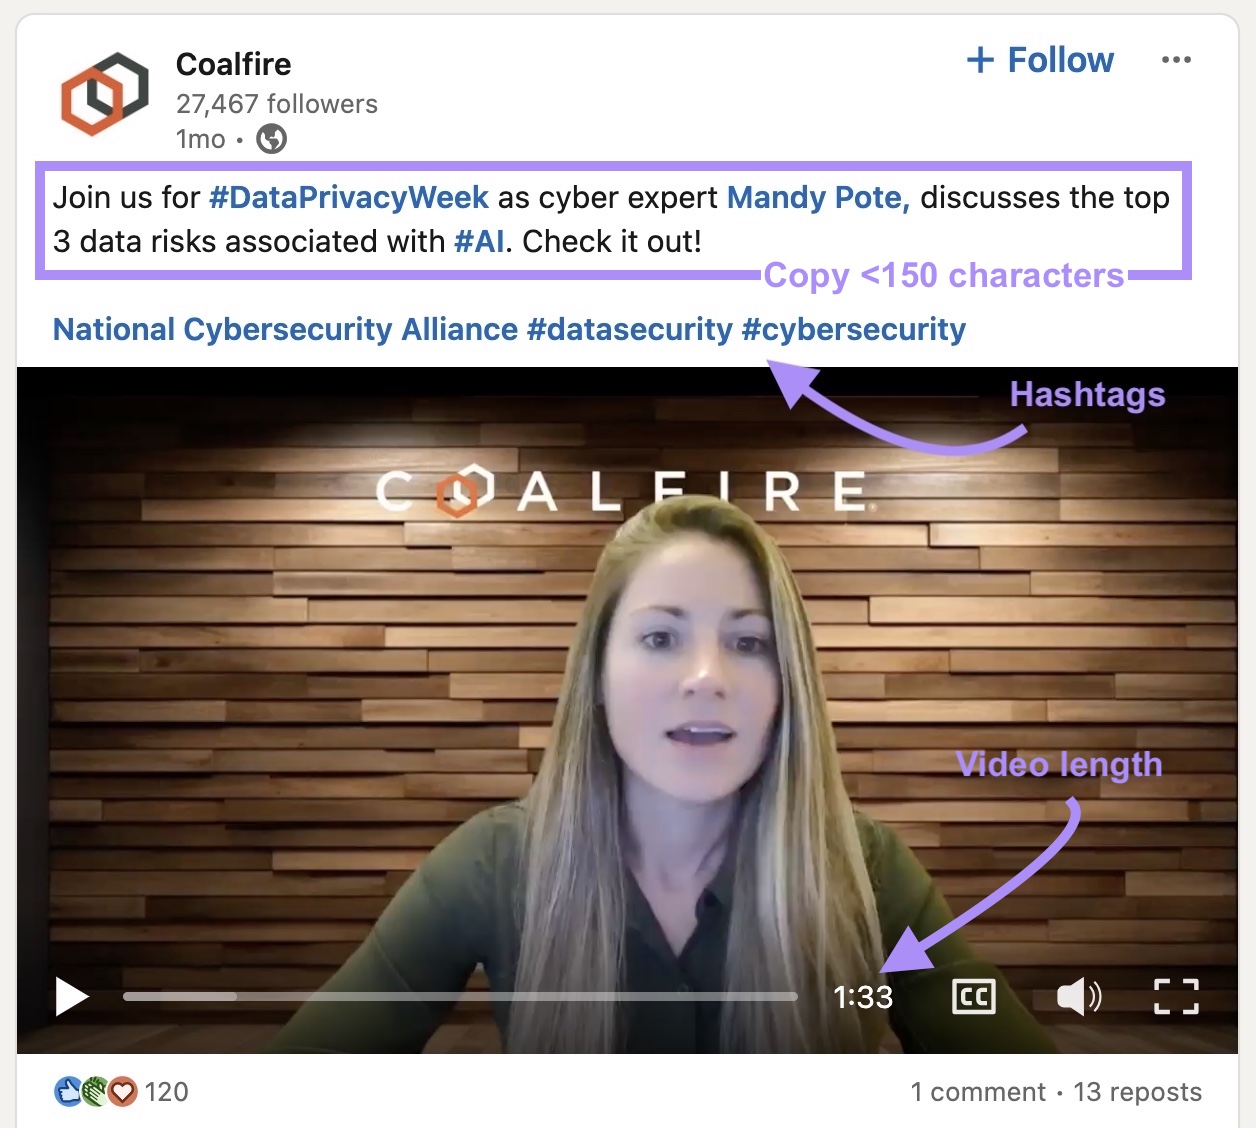 Coalfire's LinkedIn video with copy characters, hashtags, and video length elements highlighted